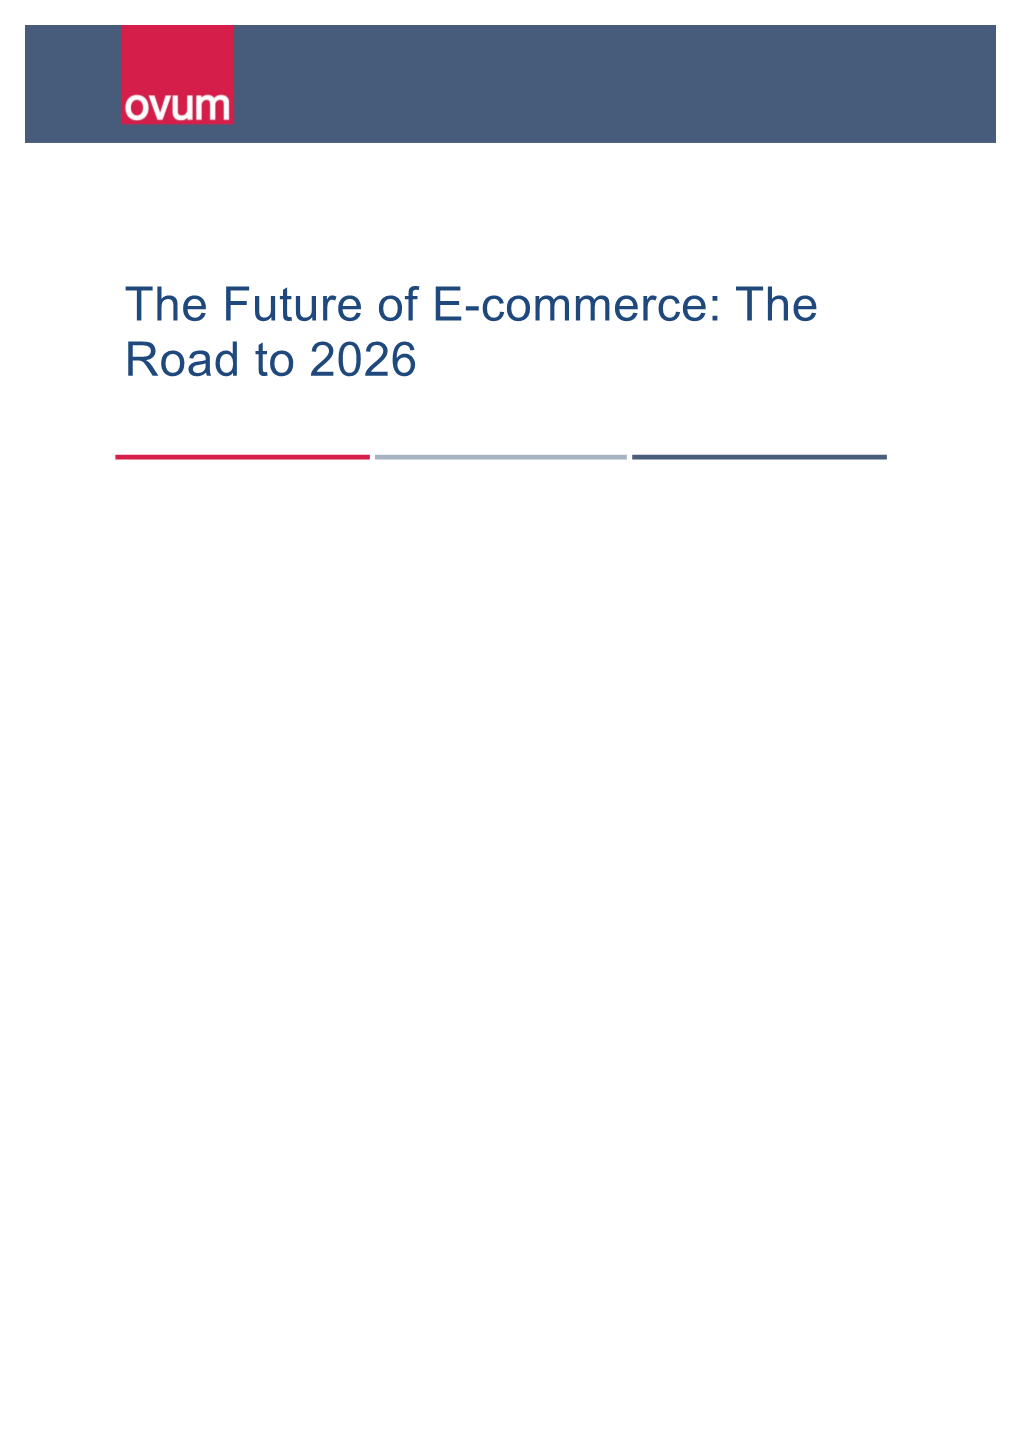 The Future of E-Commerce: the Road to 2026